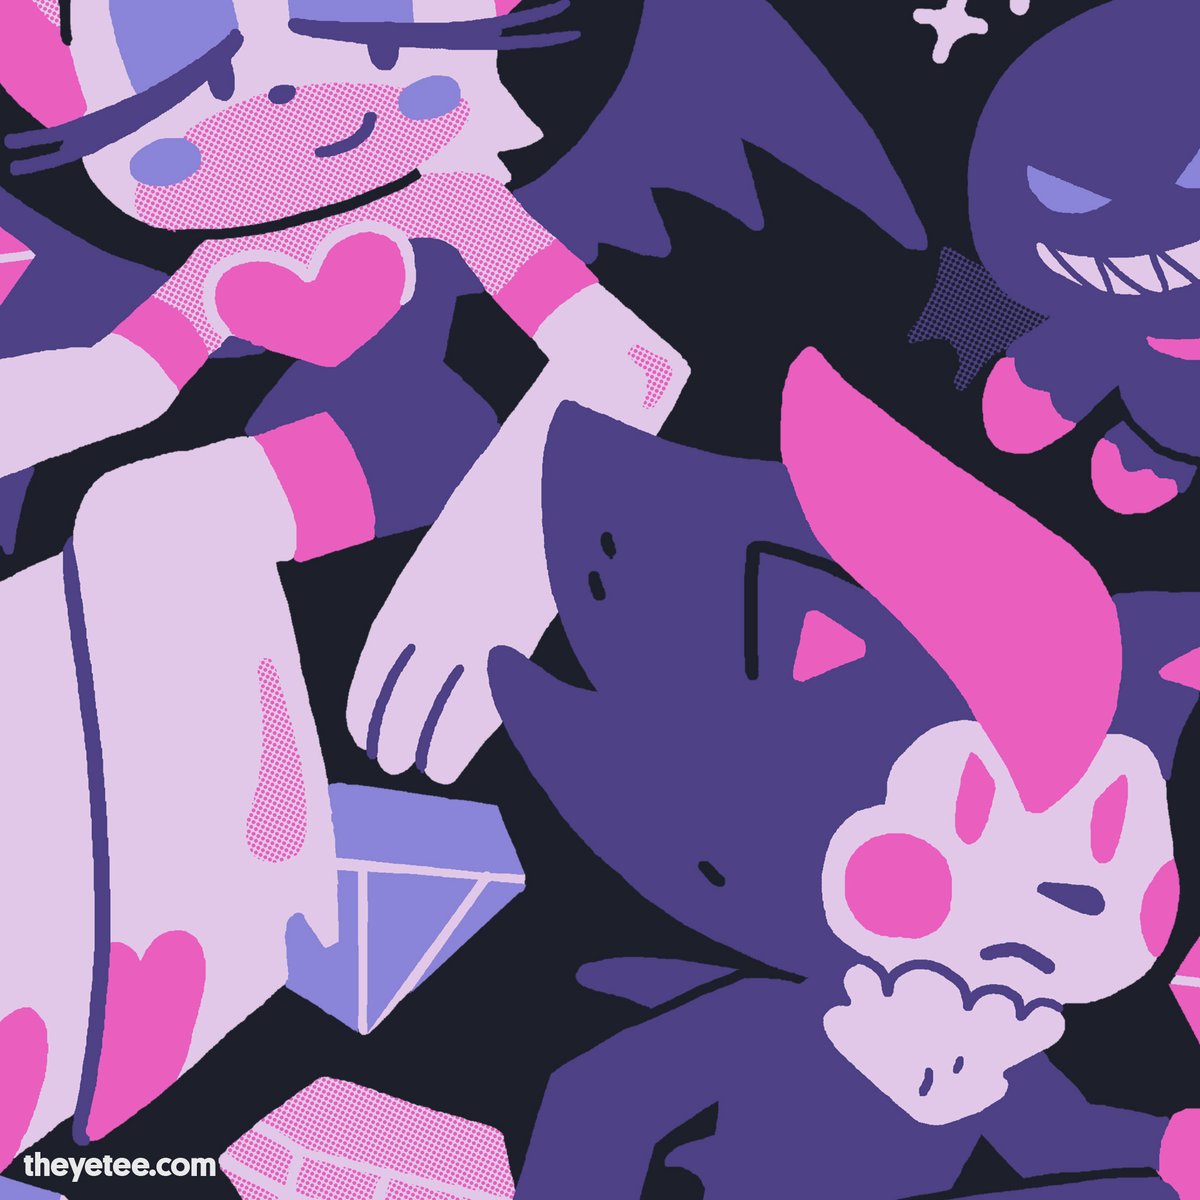 「Don't get cut on the edge… #sneakpeek  」|The Yetee 🌈のイラスト